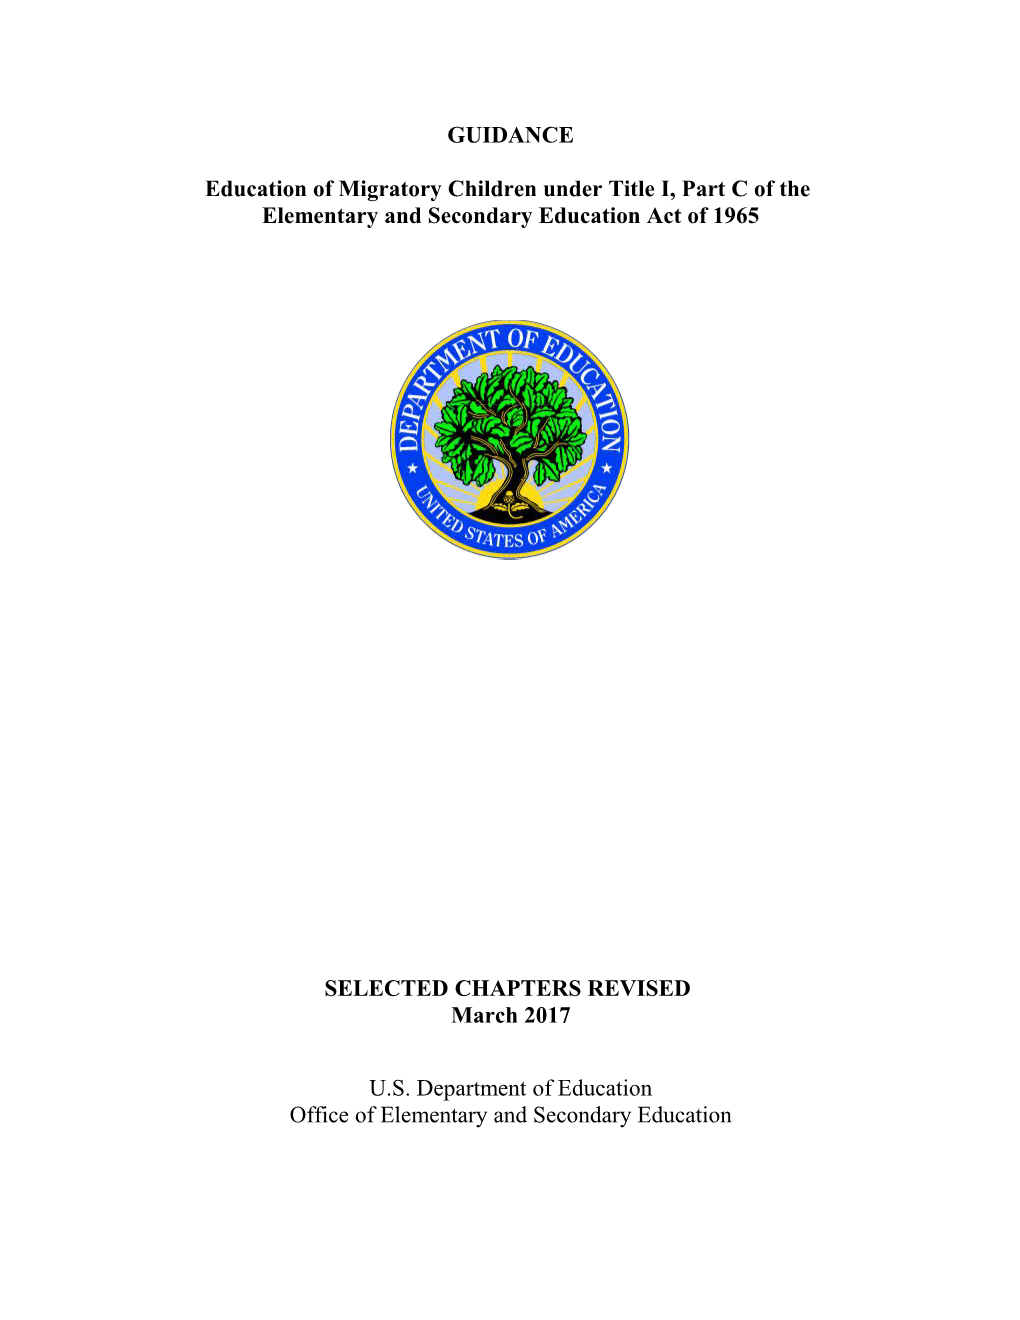 Non-Regulatory Guidance Title I, Part C Education of Migratory Children (MS Word)